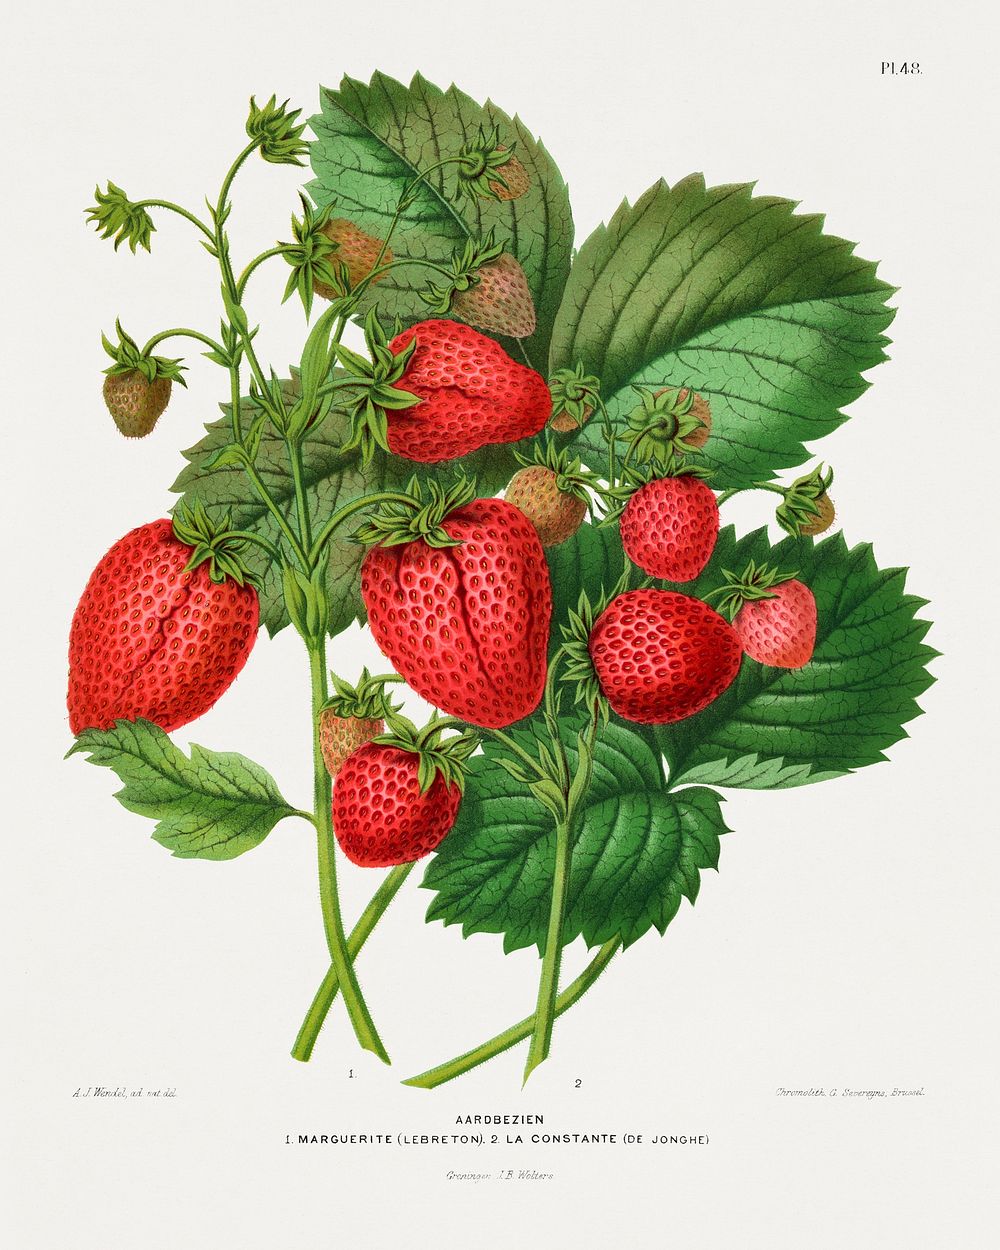 Aardbezien (strawberry) chromolithograph plates by Abraham Jacobus Wendel. Digitally enhanced from our own 1879 edition…